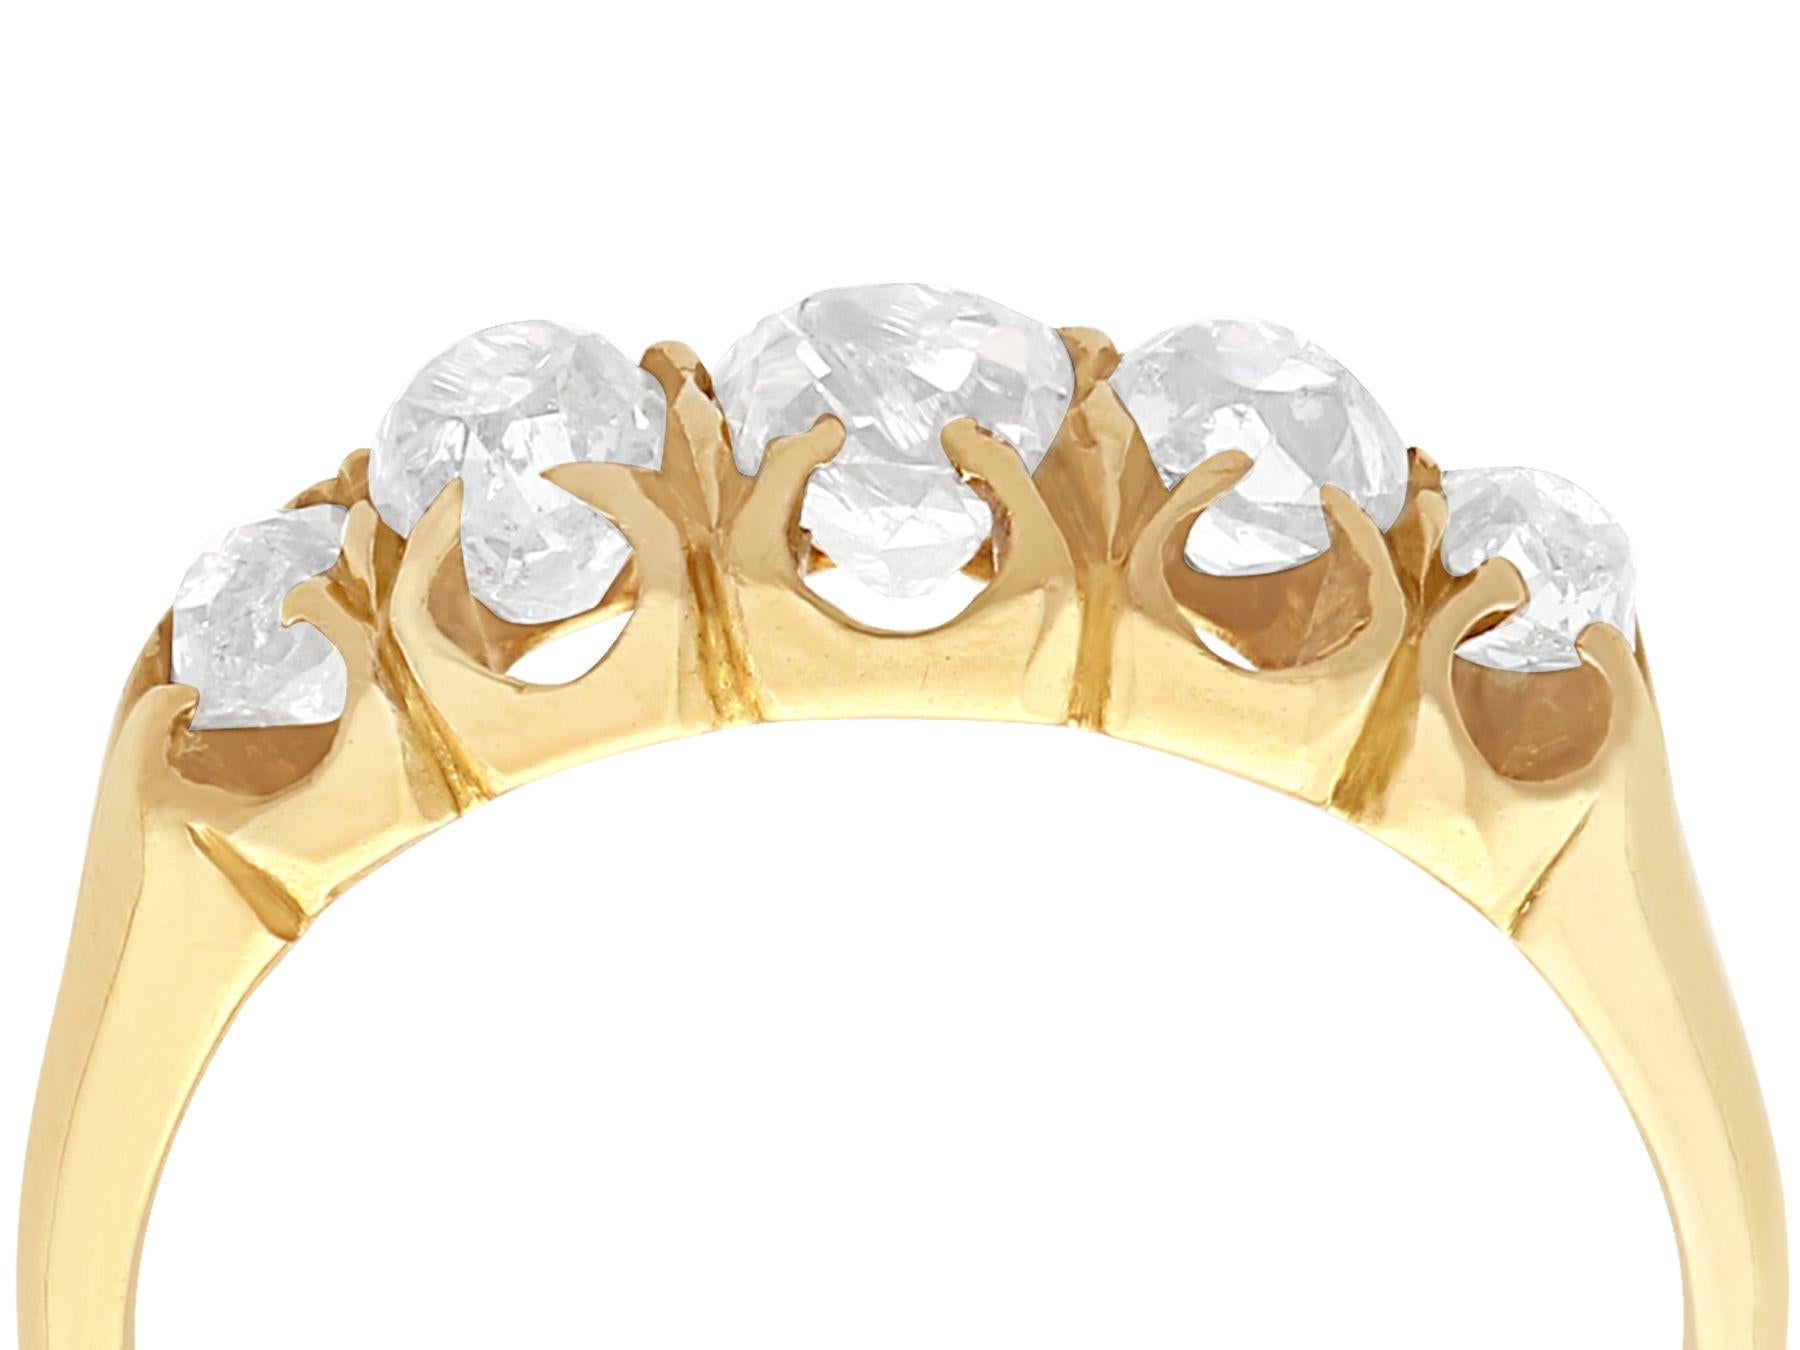 A fine and impressive antique Victorian 0.78 carat diamond and 18 karat yellow gold, five stone ring; part of our antique jewelry and estate jewelry collections.

This fine and impressive Victorian diamond ring has been crafted in 18k yellow